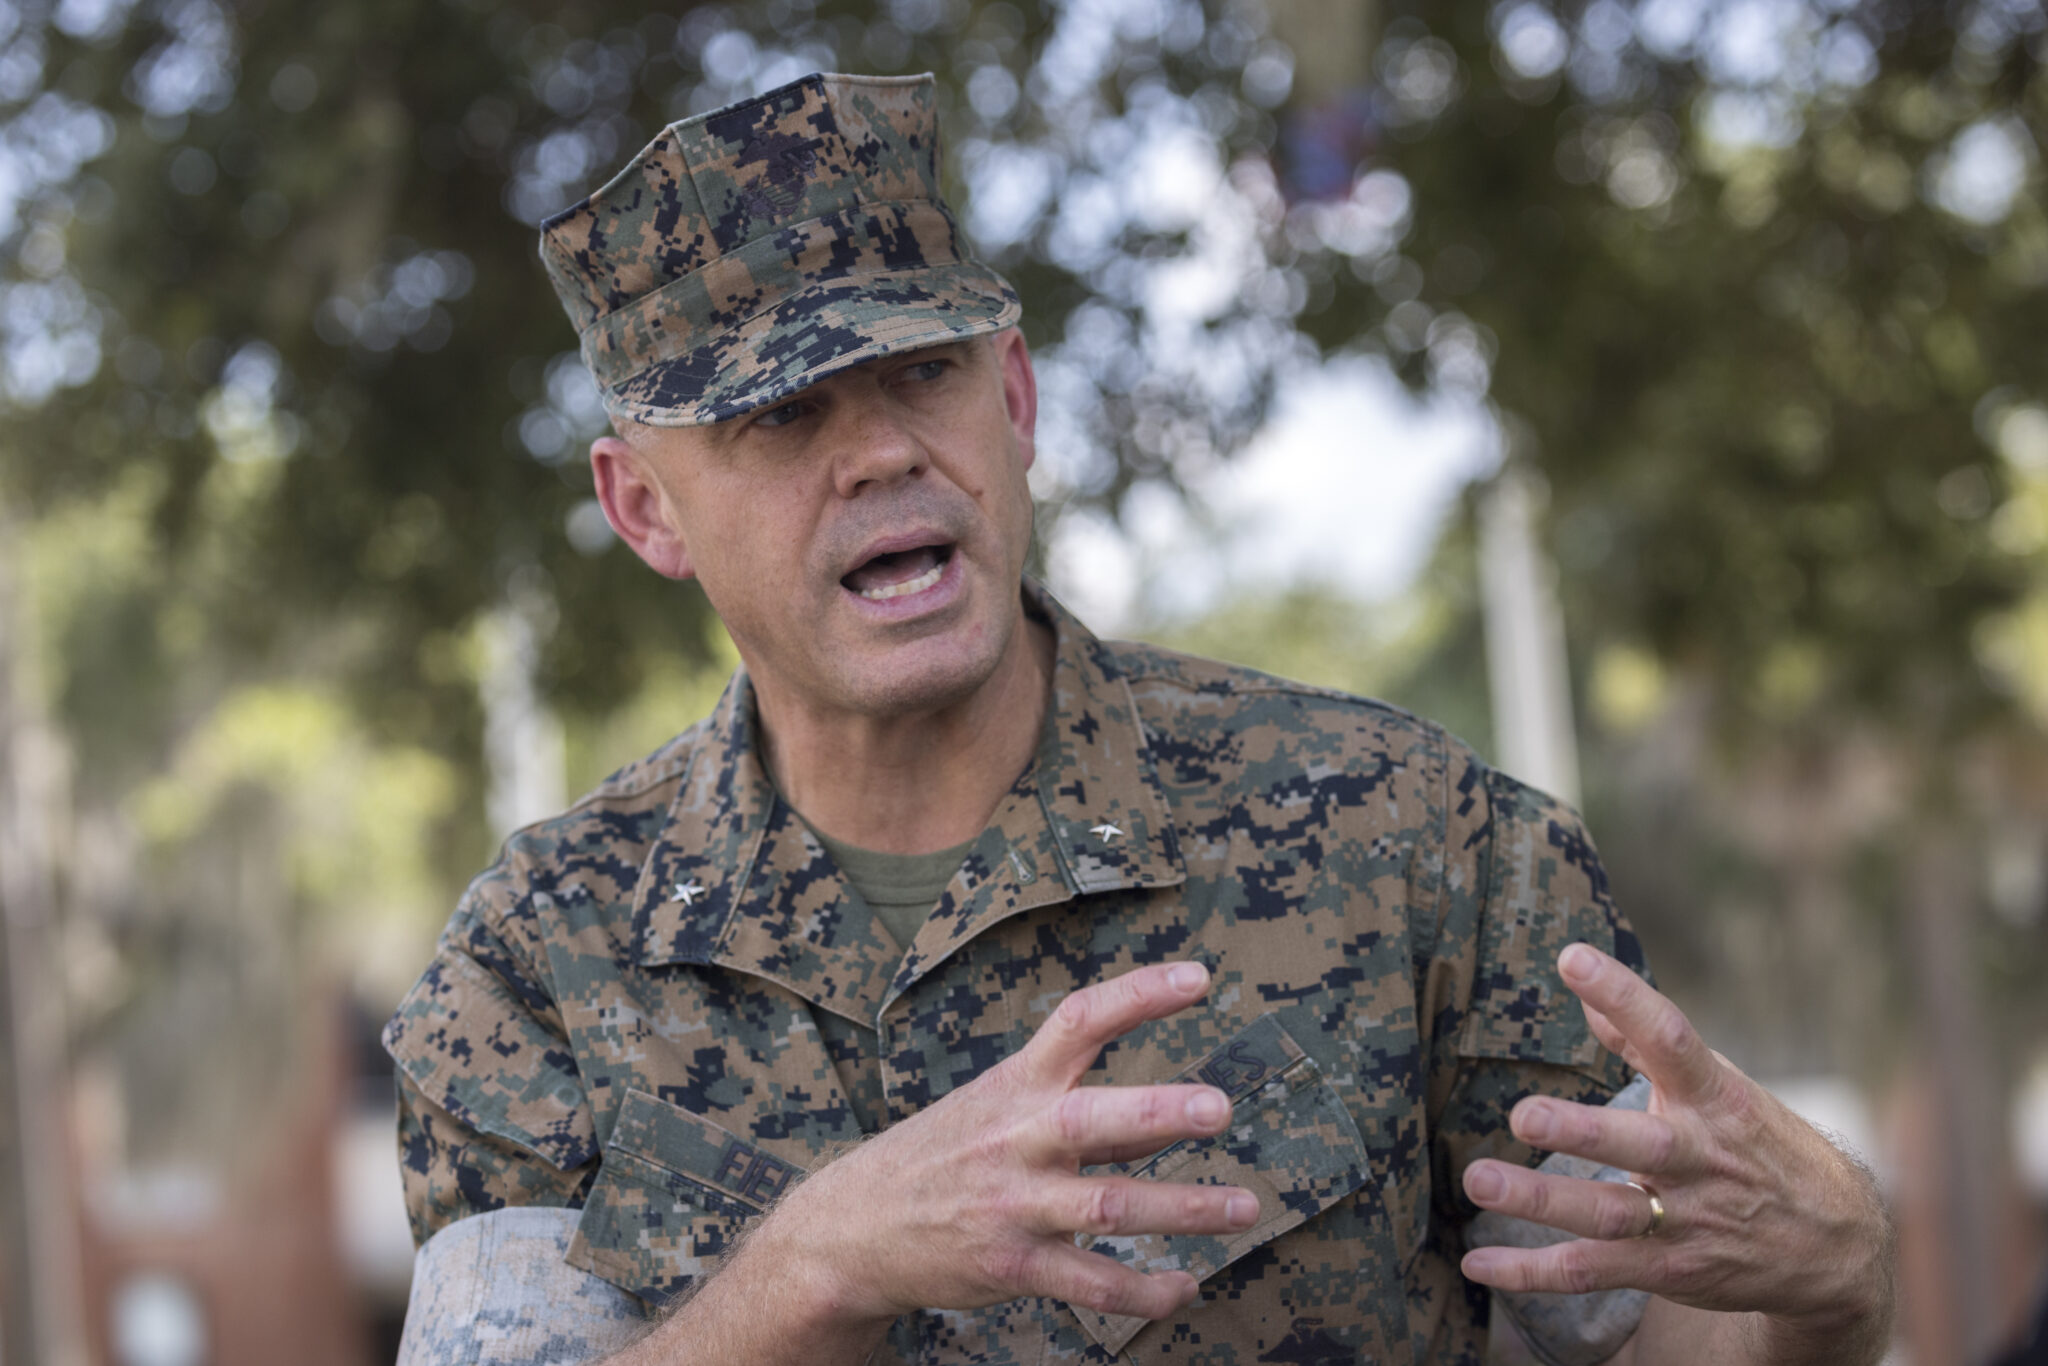 U.S. Marines recruiting surges while other services struggle - NewsLooks